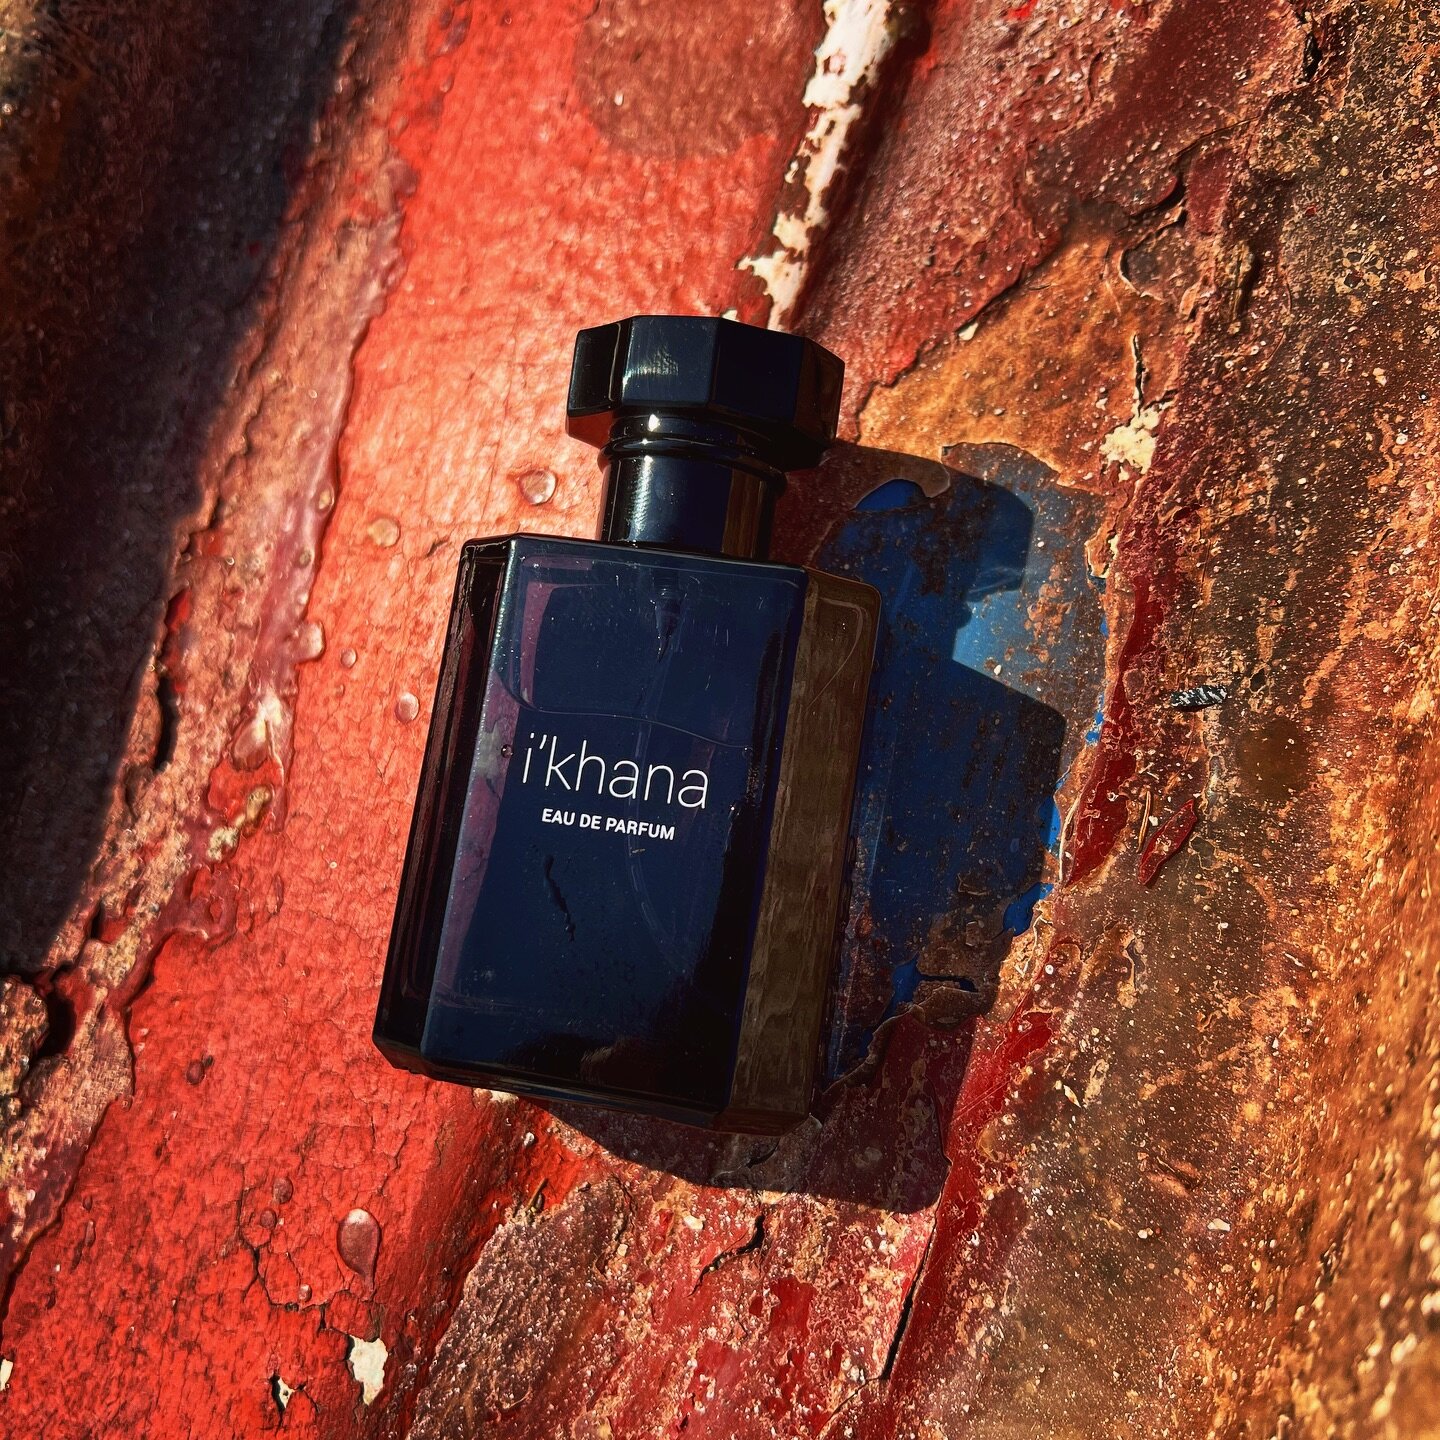 As the temps drop all the more need for a tropical scent. 
It&rsquo;s what we&rsquo;re wearing.

_____________________
#ikhana #eaudeparfum #byadage #fragrance #beauty #nicheperfume #nicheluxe #indieperfume #sotd #fragrancelover #tropicalscent #spice